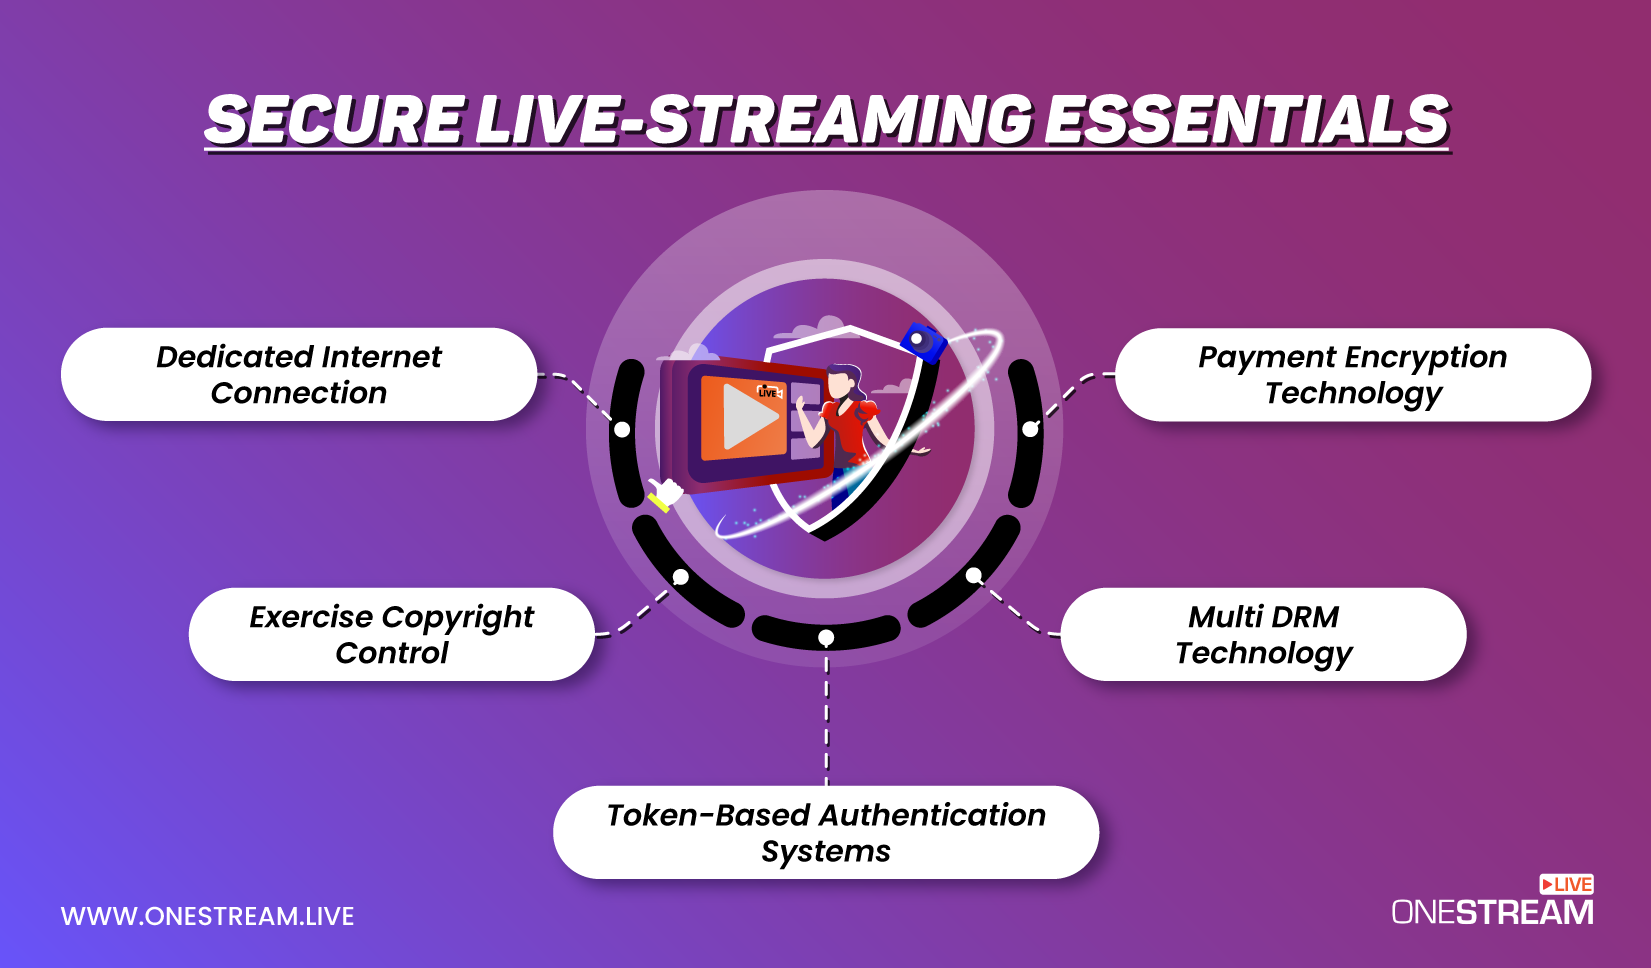 Secure live streaming